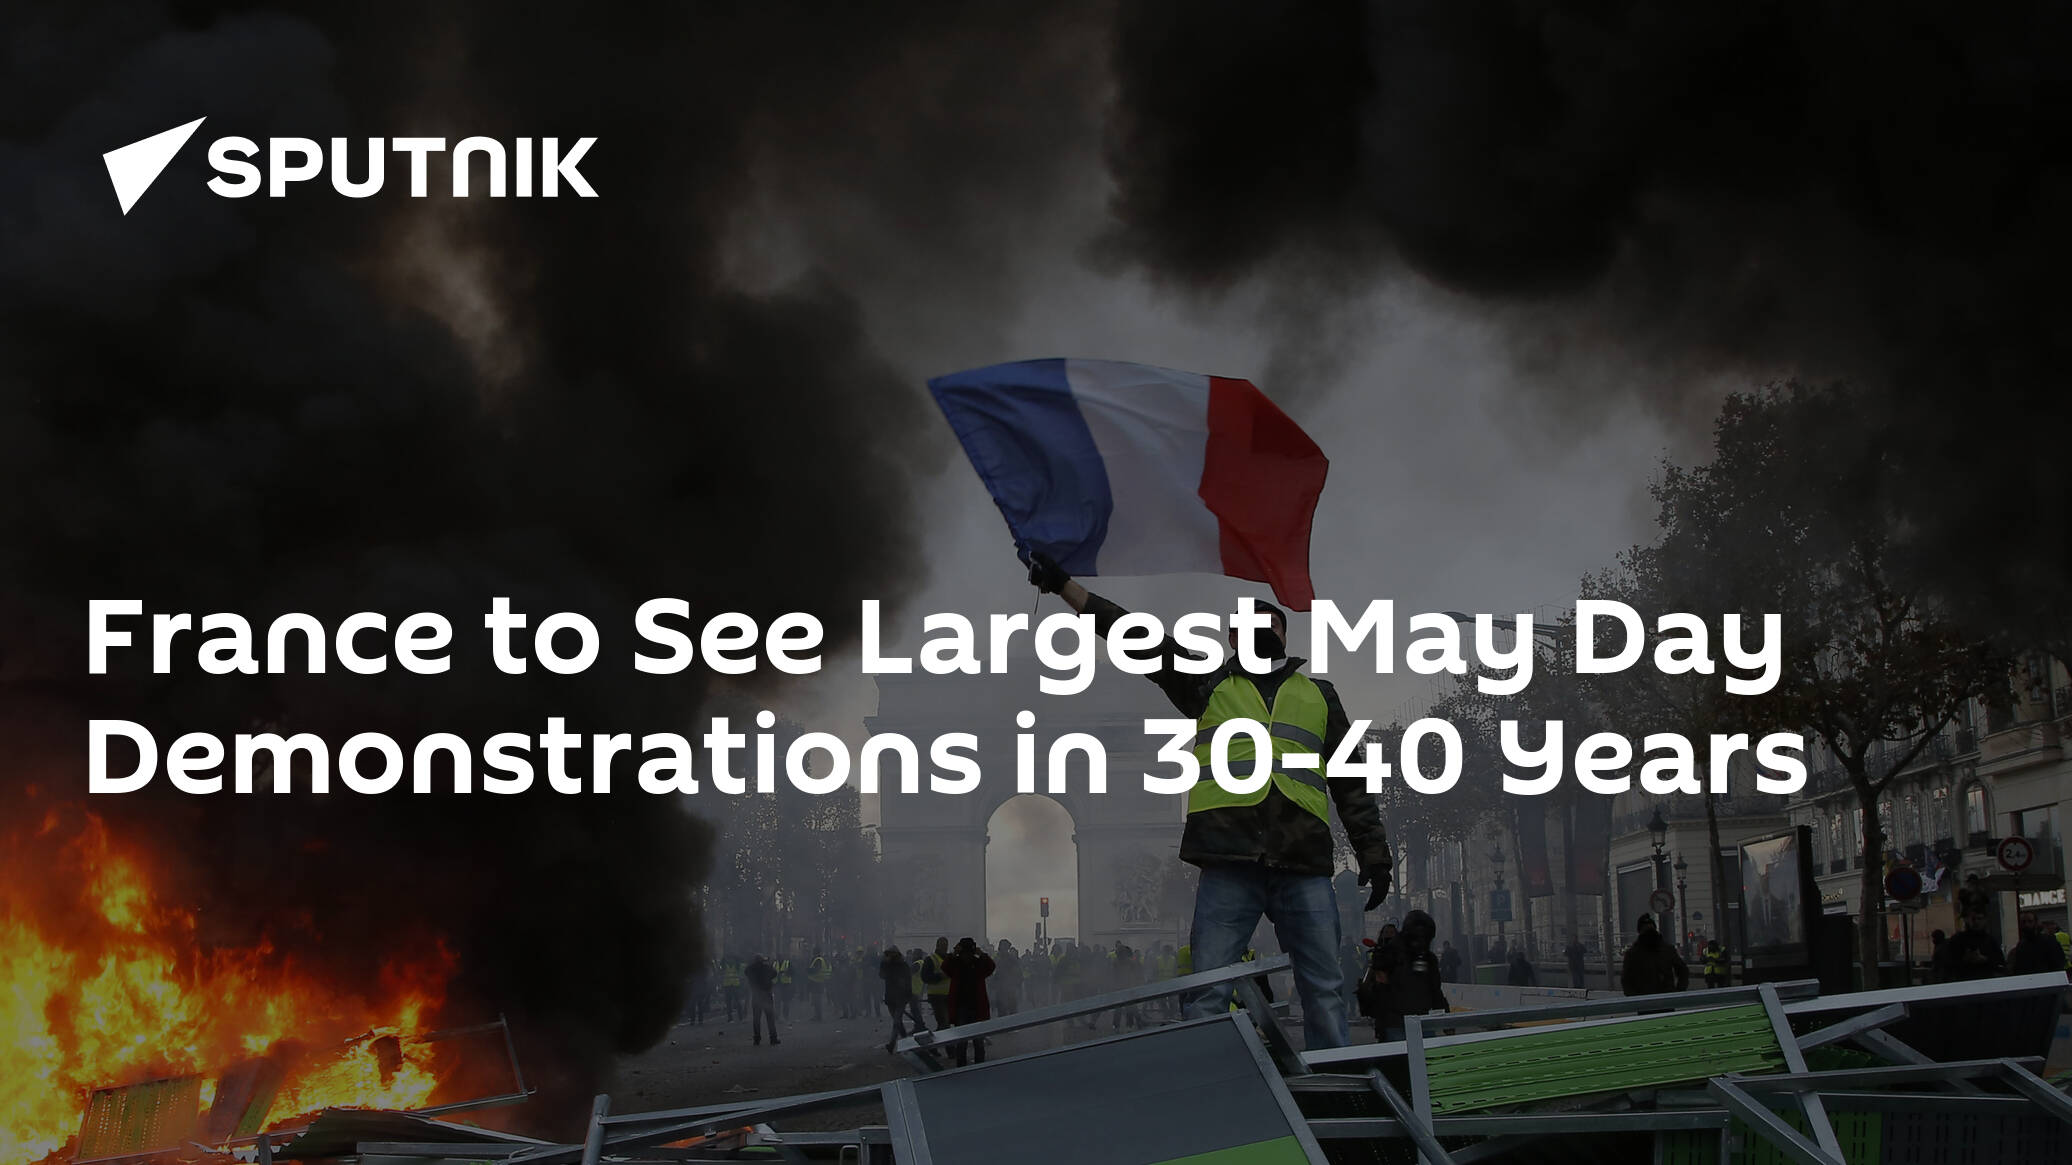 France to See Largest May Day Demonstrations in 30-40 Years